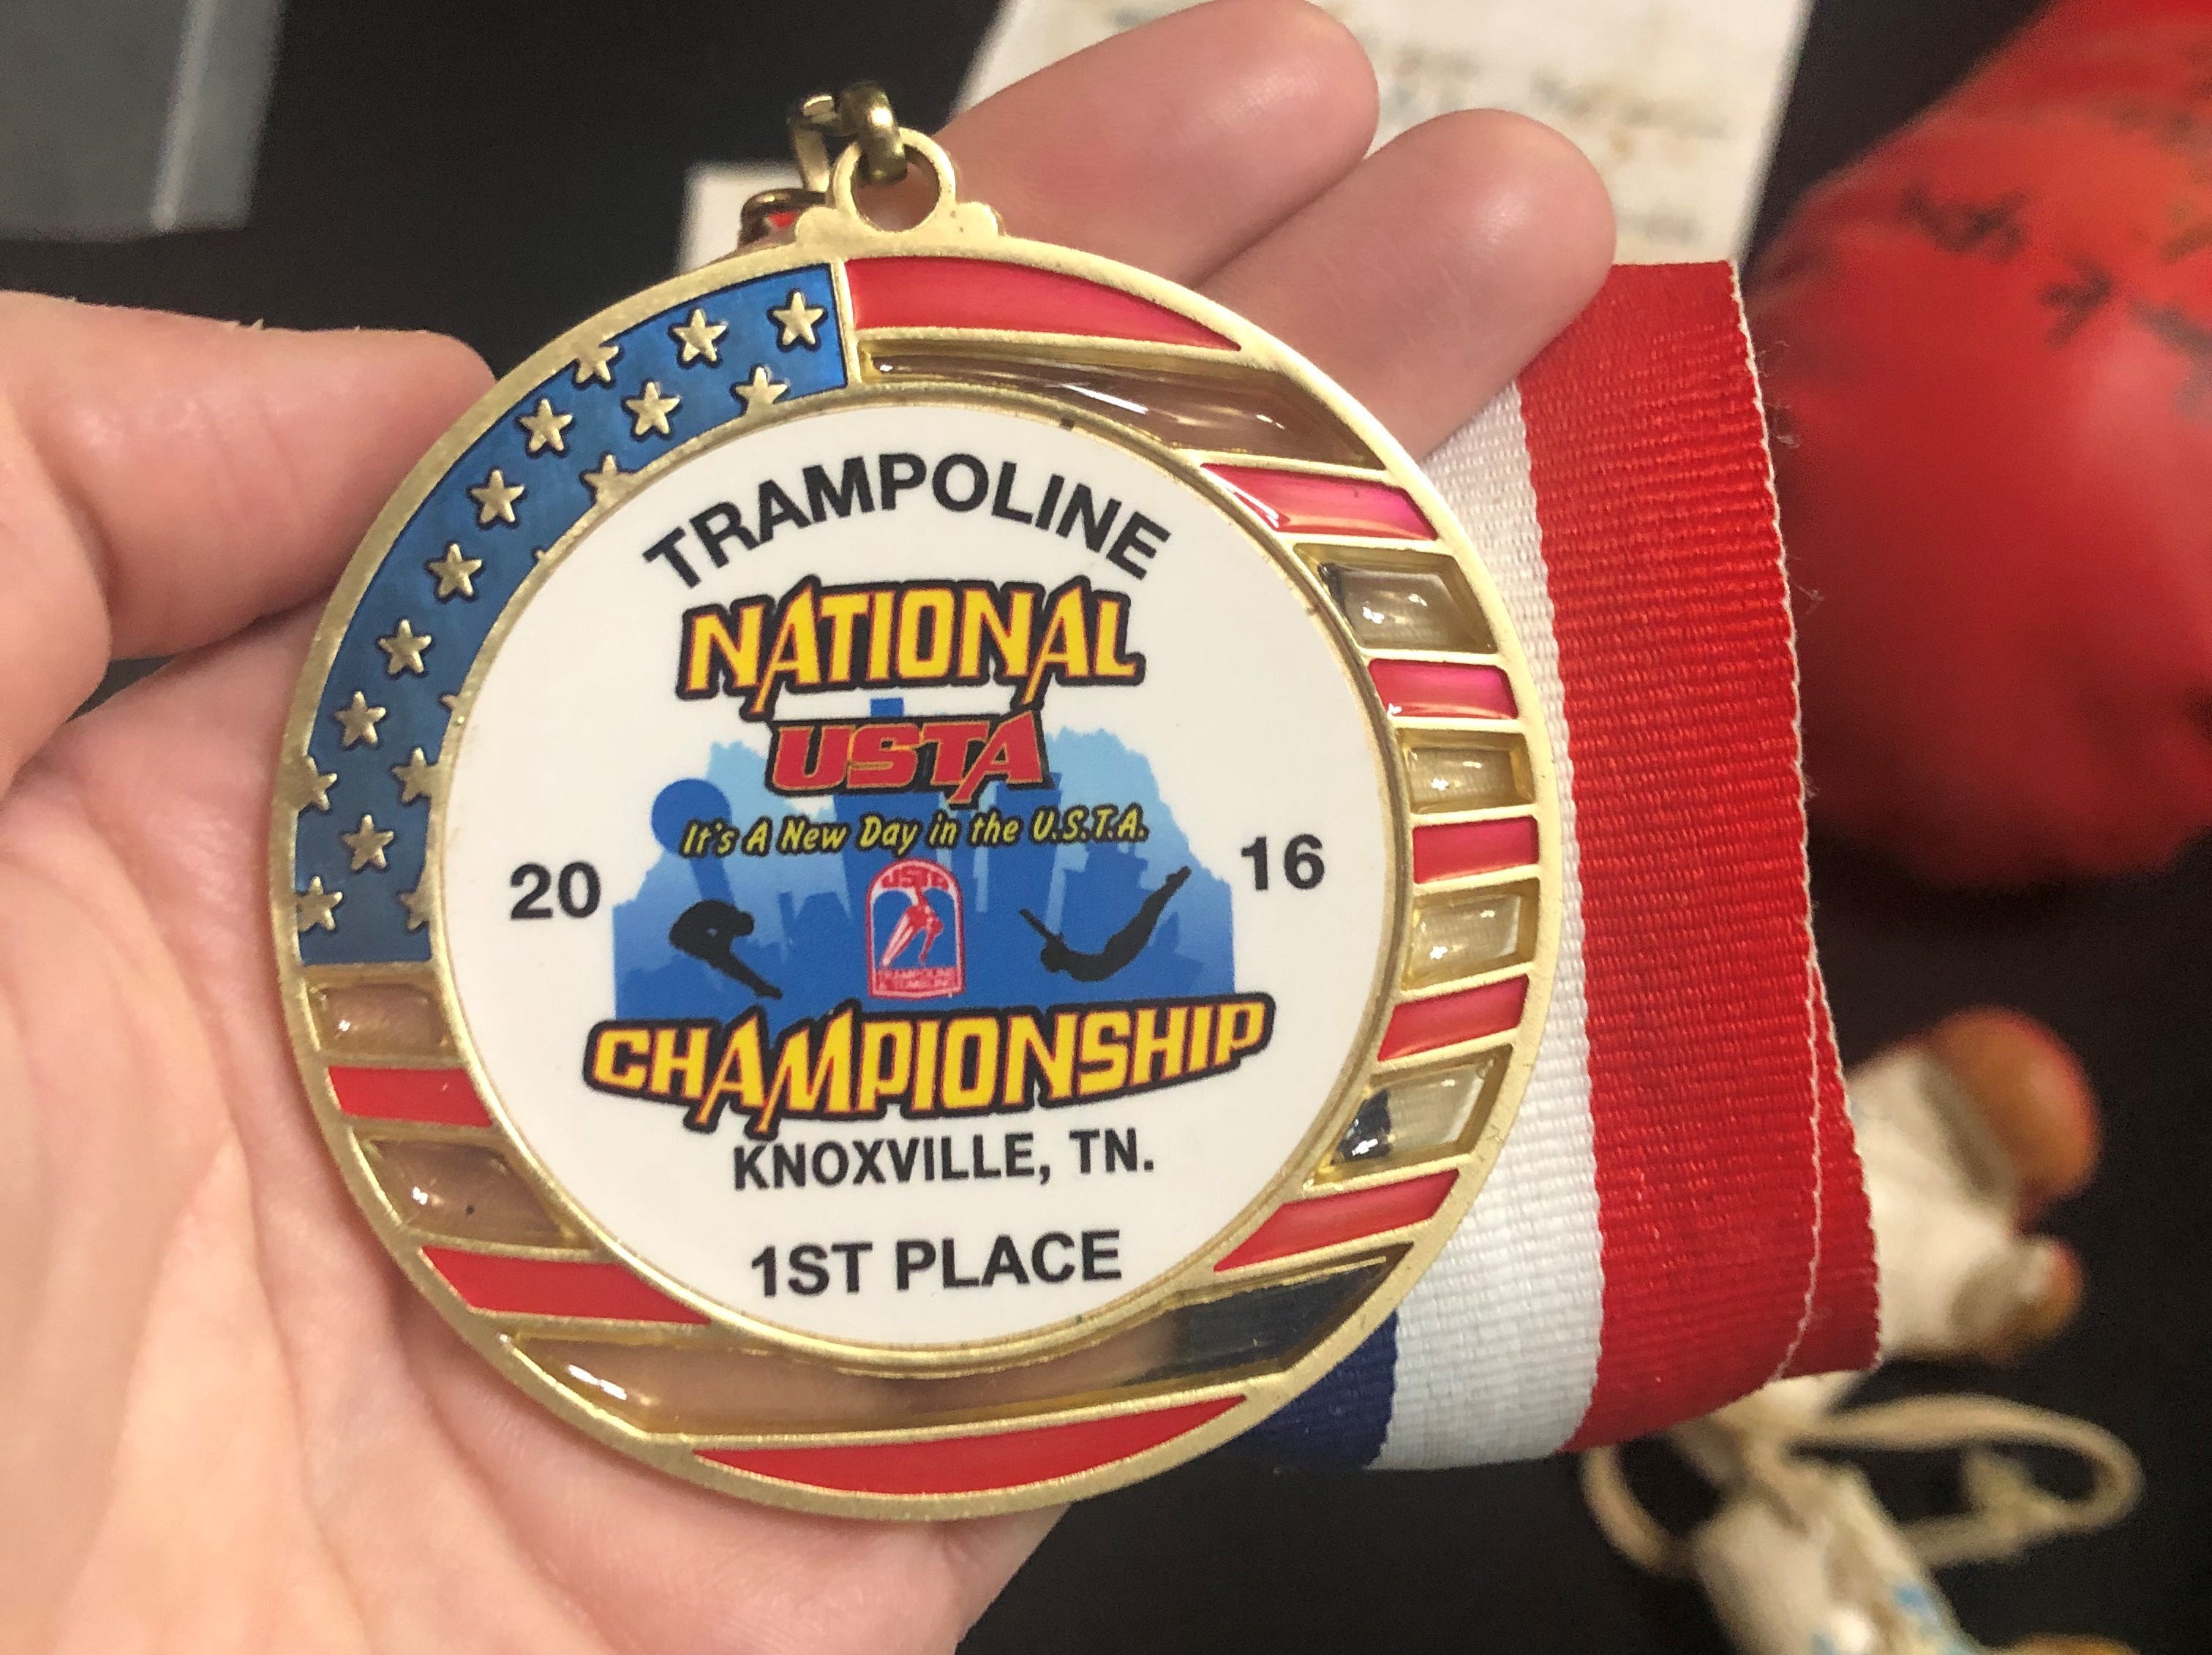 This first-place medal from the Trampoline National USTA Championship in Knoxville in 2016 was left at Muhammad Ali's grave.